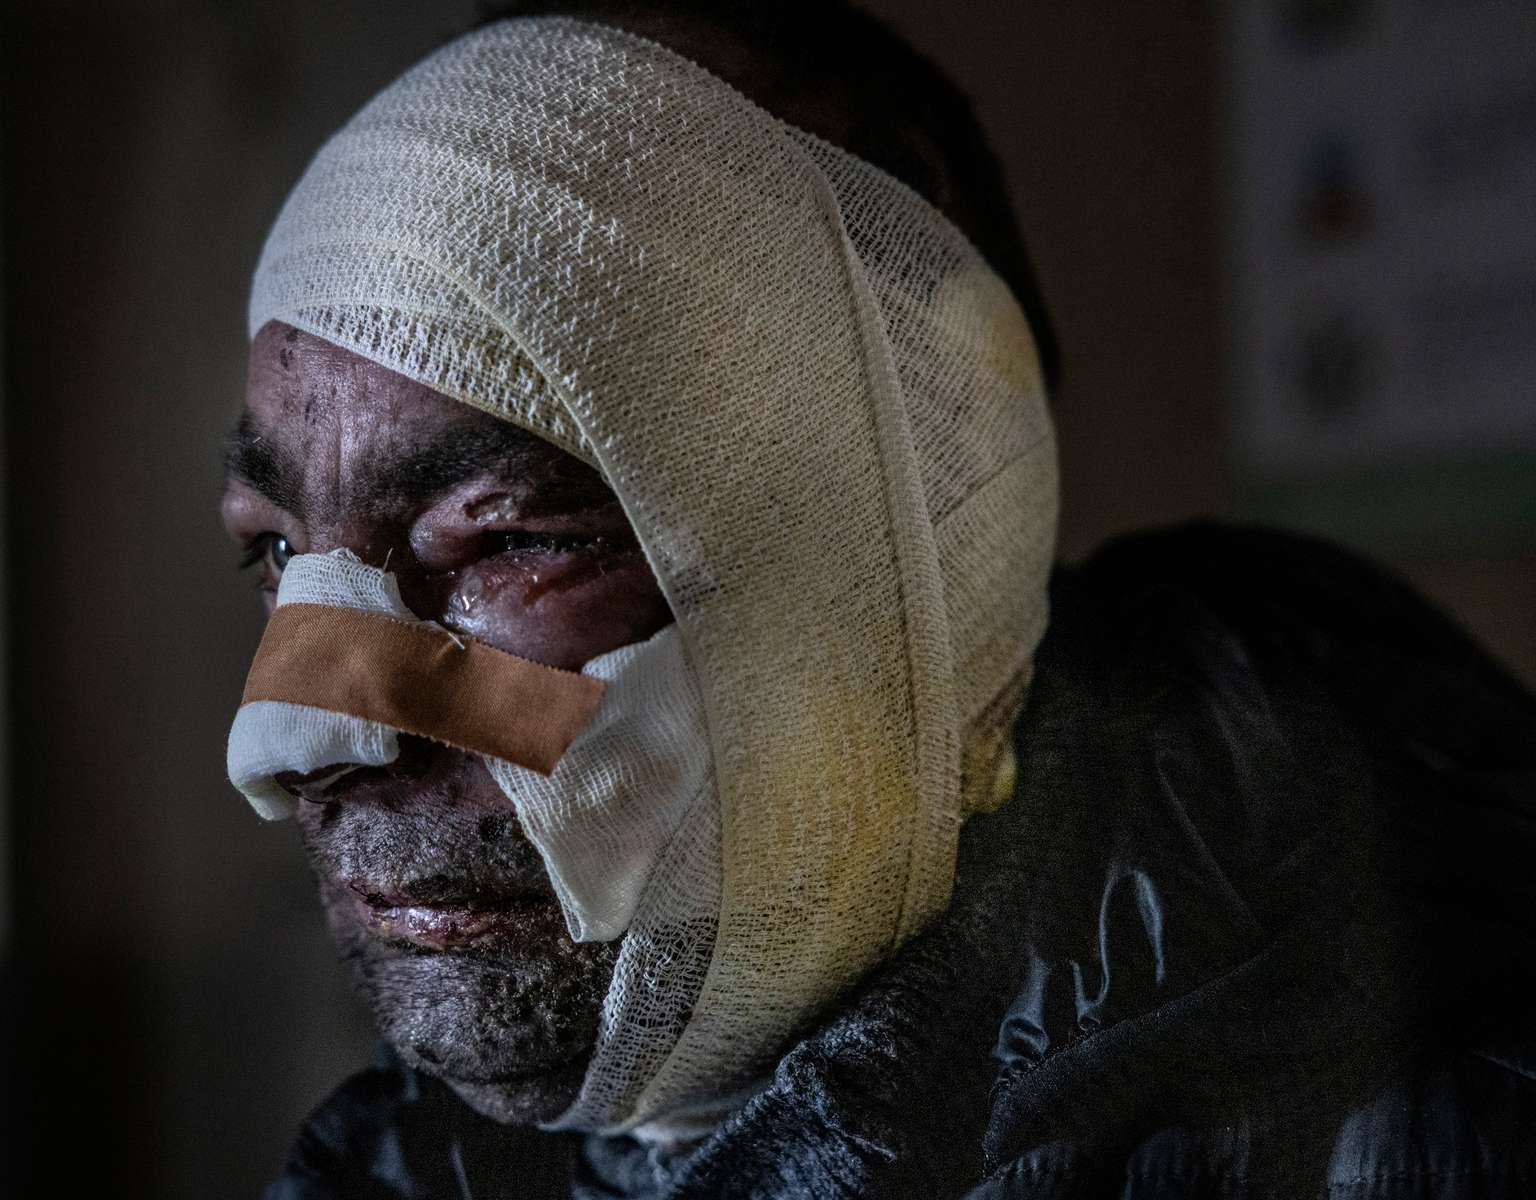 Viktor Zakharchuk is seen recovering at the Brovary hospital on March 19, 2022 he was injured when his home in Zalissya was shelled. The family hid in a neighbor’s home as the battle raged around them, they were eventually rescued and take to the Brovary general hospital.